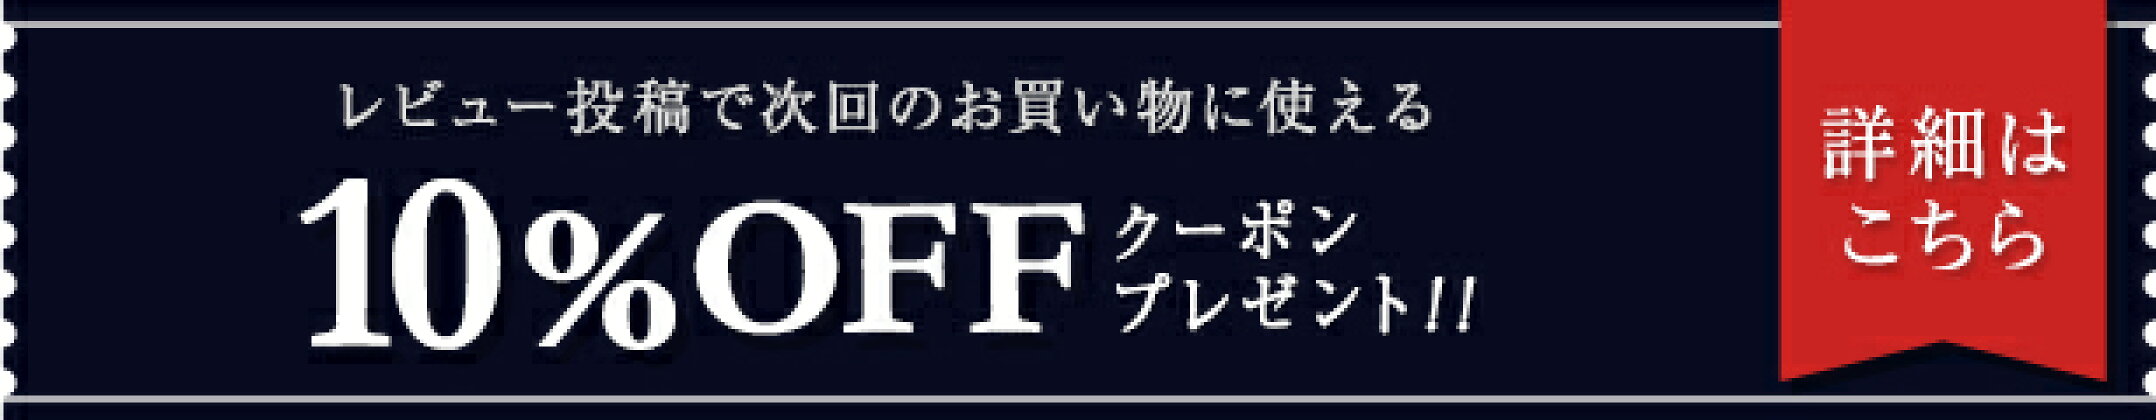 10%offクーポンプレゼント